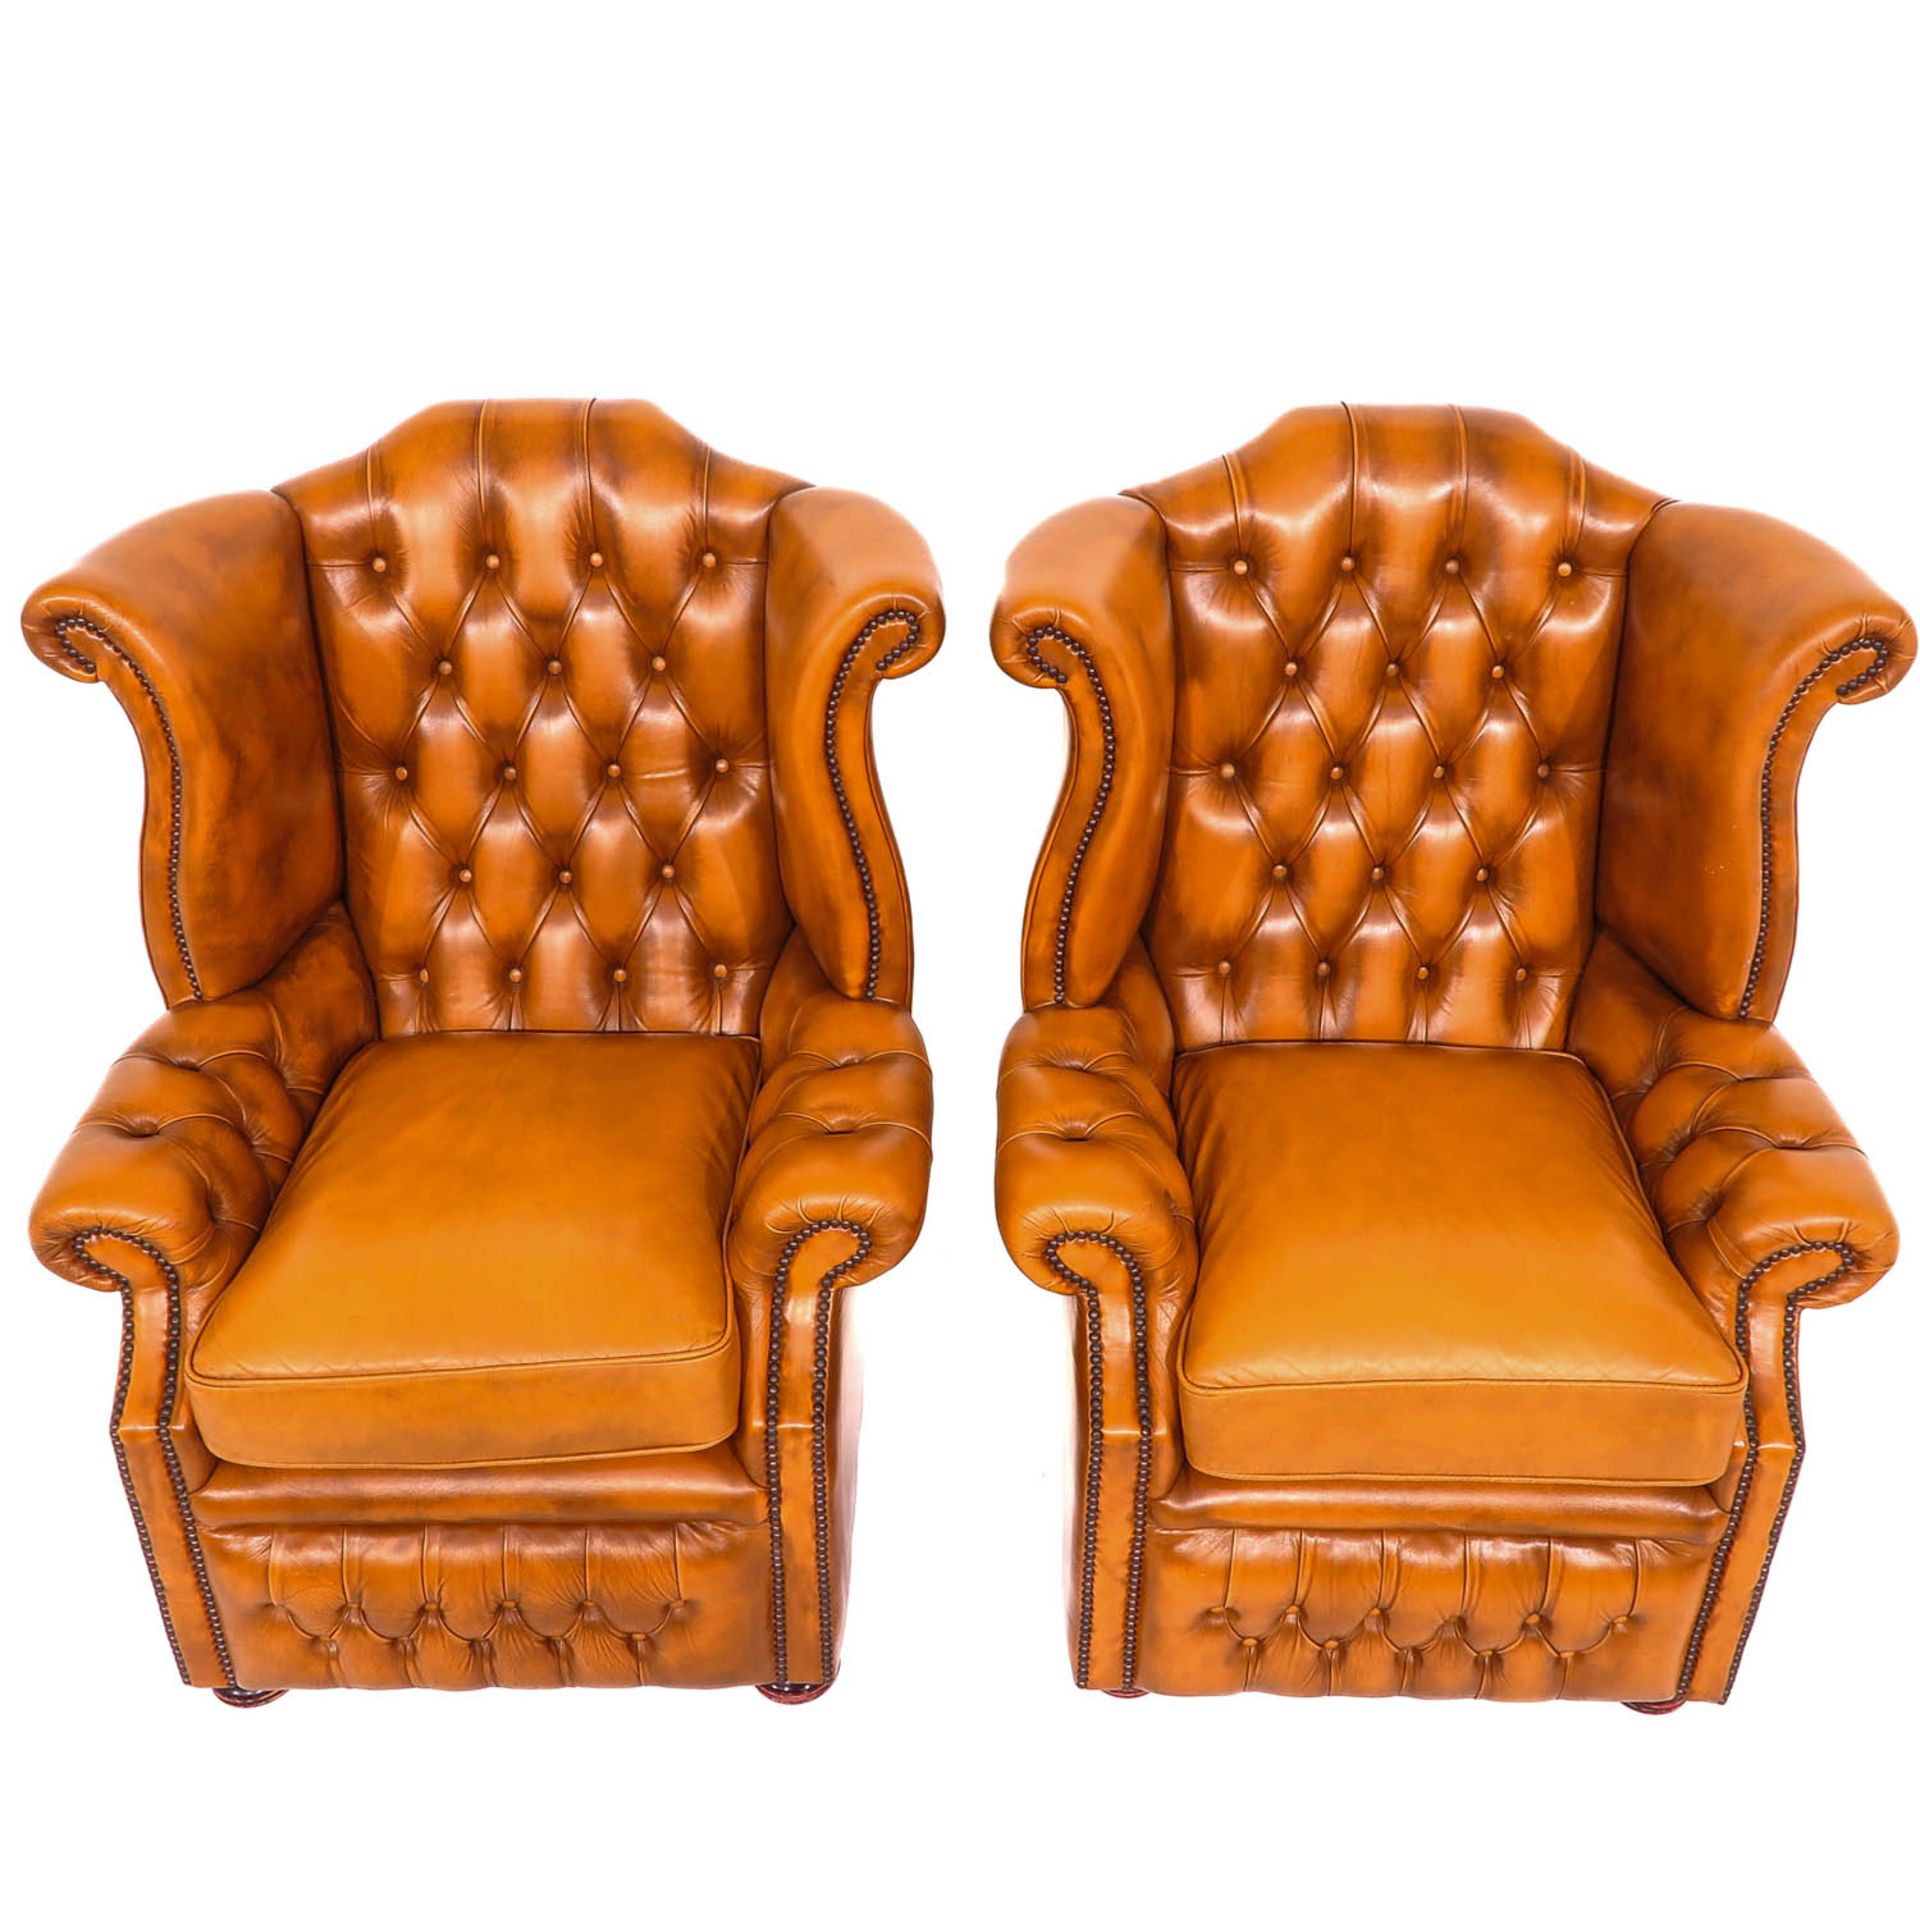 A Pair of Springvale English Chesterfield Chairs - Image 5 of 10